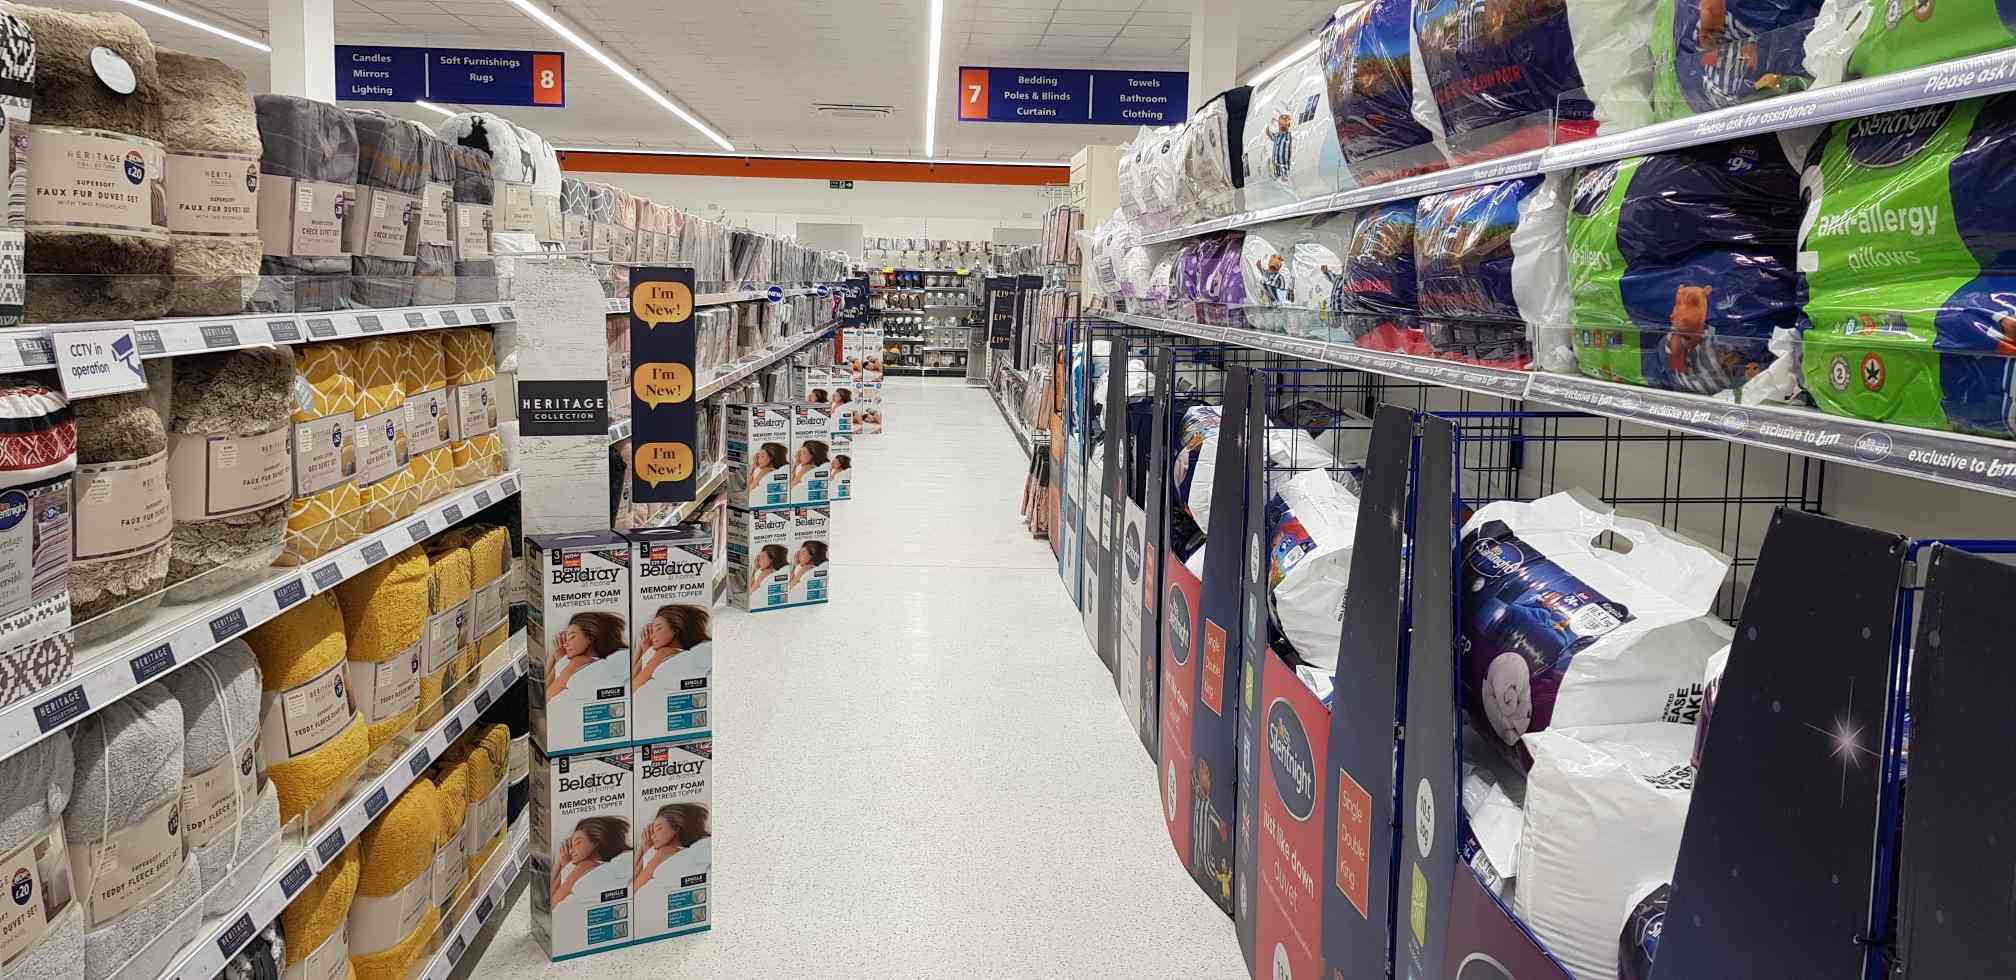 B&M's brand new store in Cowdenbeath stocks a charming range of bedding, including duvet covers, complete bed sets, pillow cases, mattress protectors and much more!